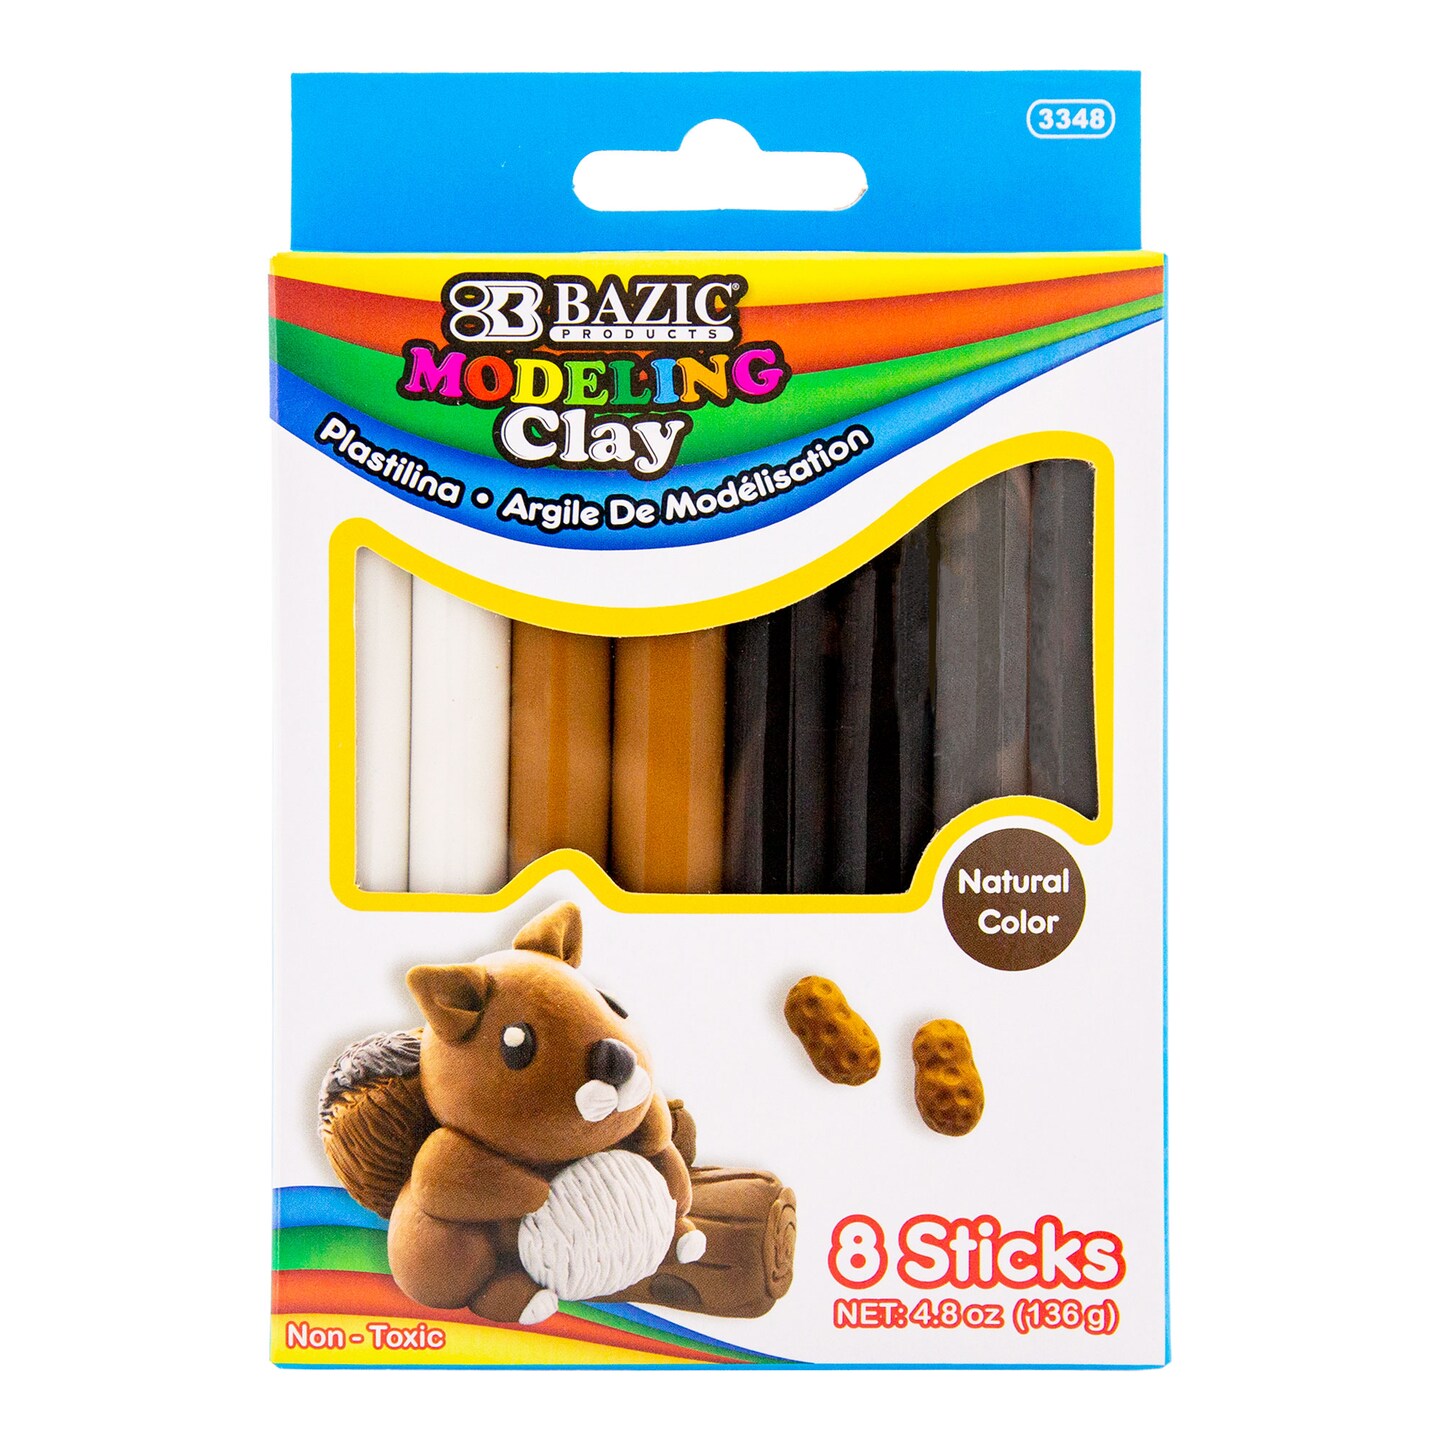 BAZIC Modeling Clay Sticks 4 Natural/ Earth Colors 4.8 Oz